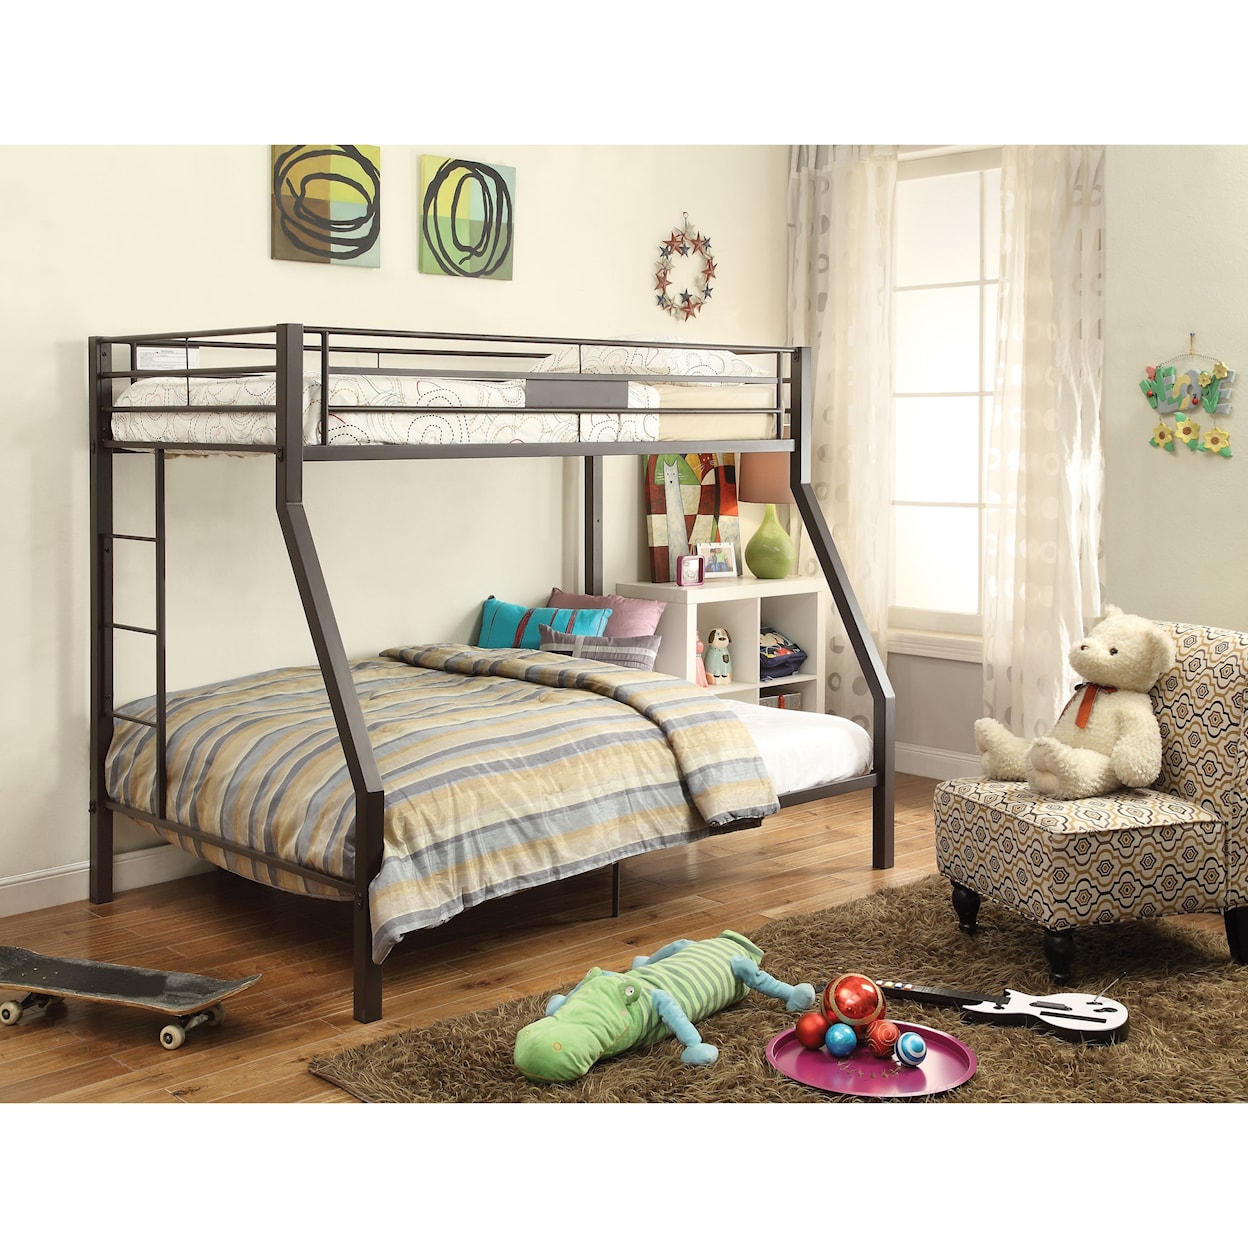 Acme Furniture Limbra Twin Over Full Bunk Bed